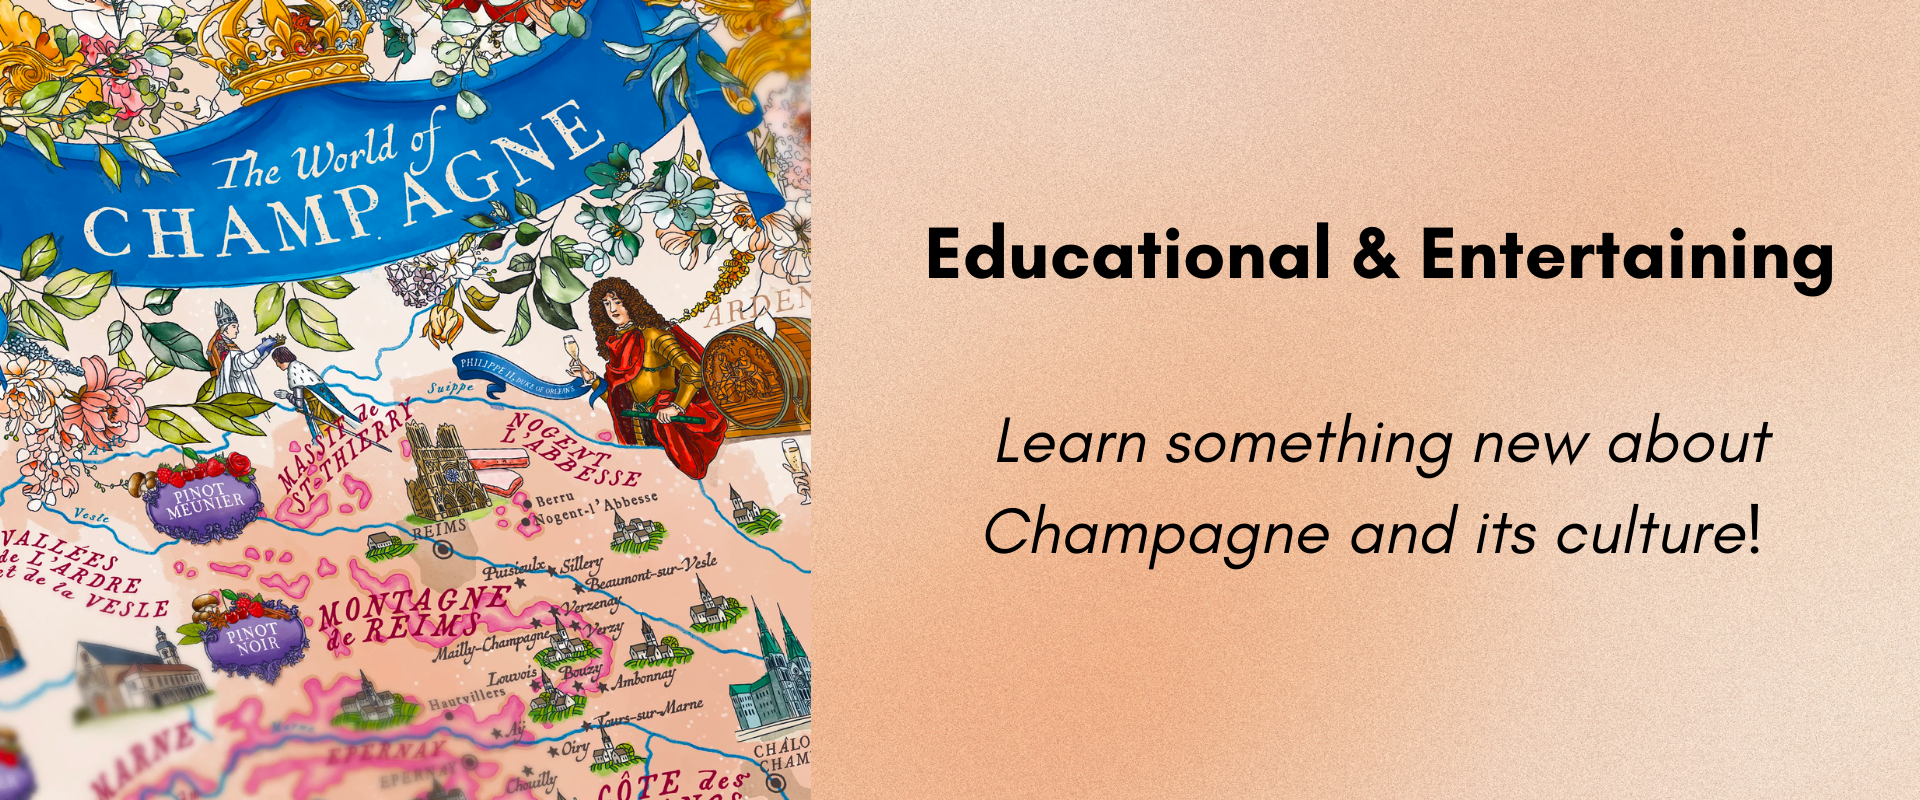 The World of Champagne, beige colored background that shows the puzzle is educational & entertaining